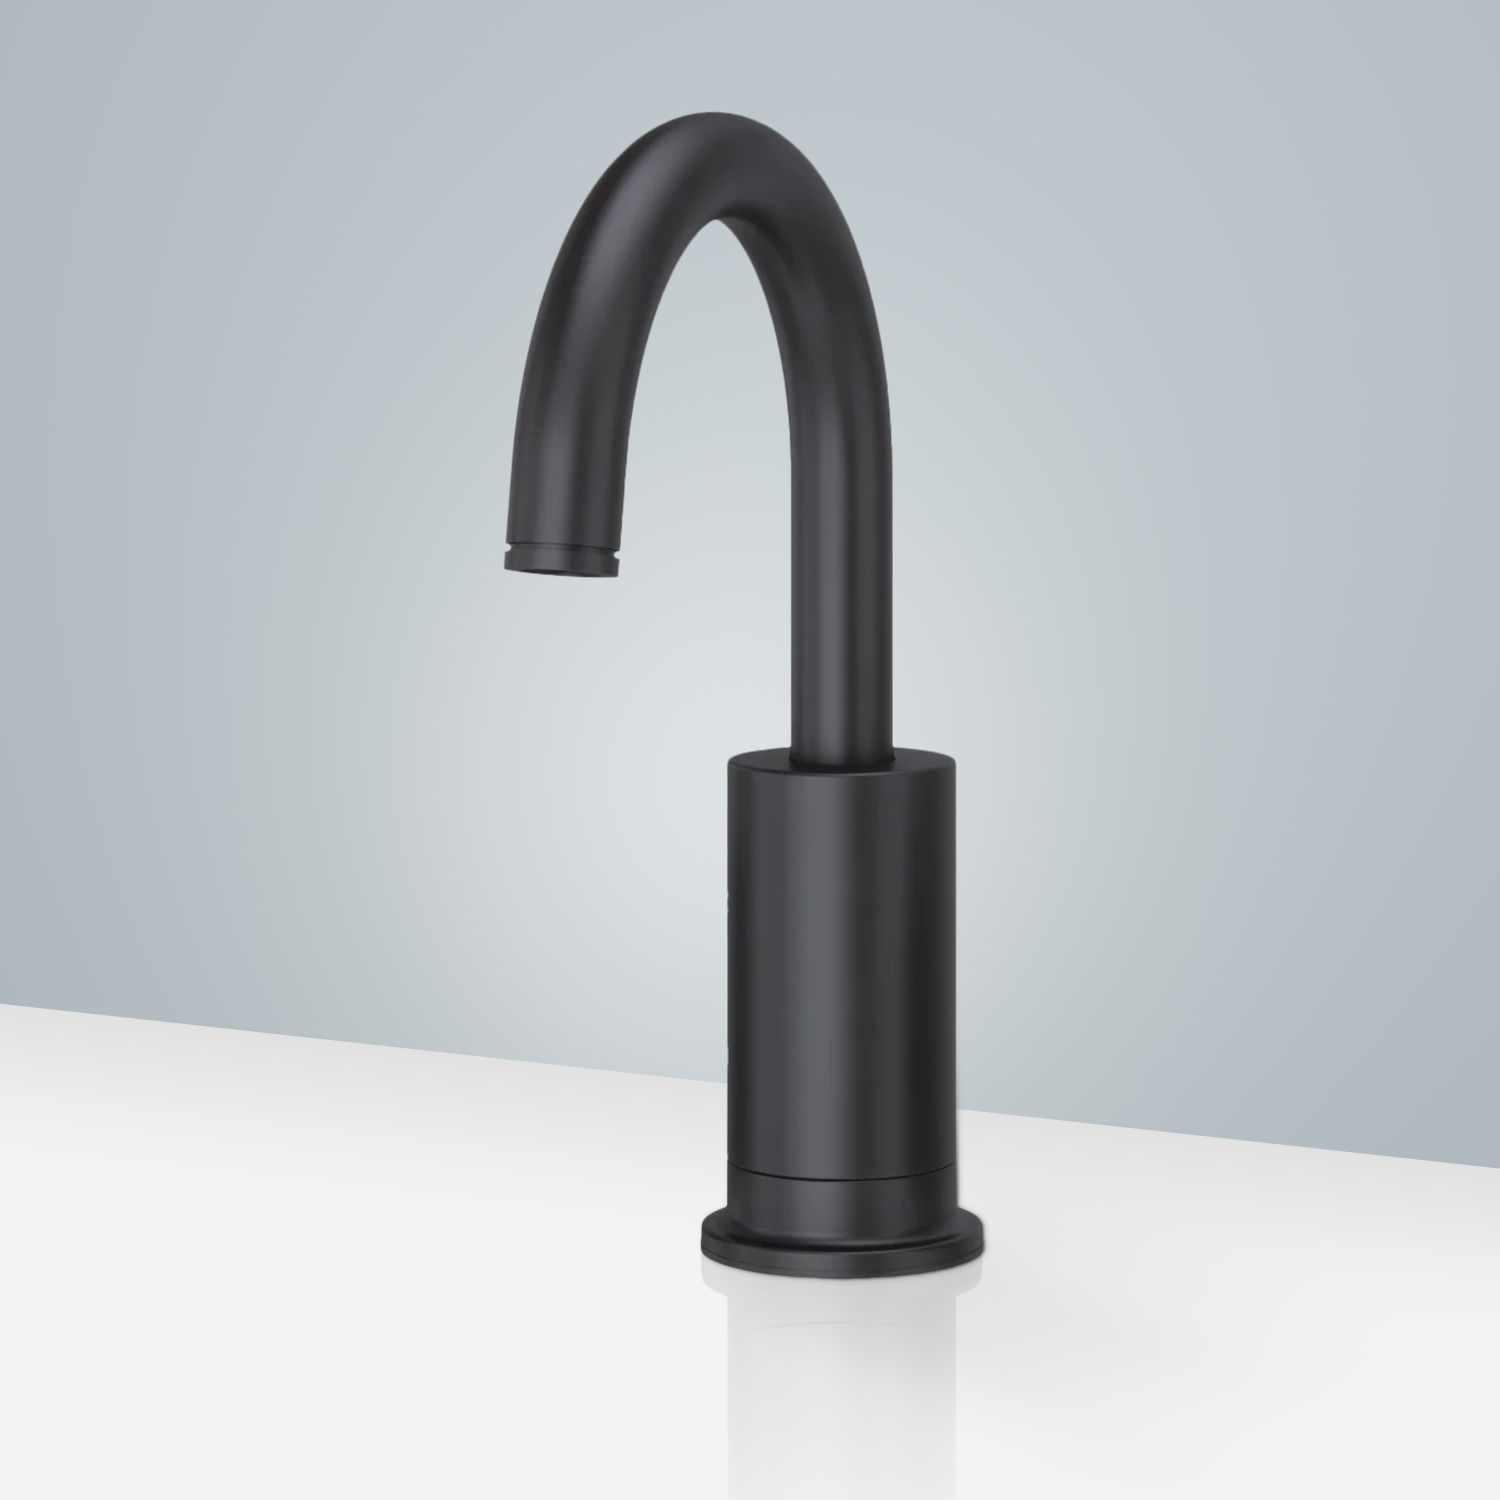 Fontana Commercial Automatic Dark Oil Rubbed Bronze Touchless Bathroom Faucet